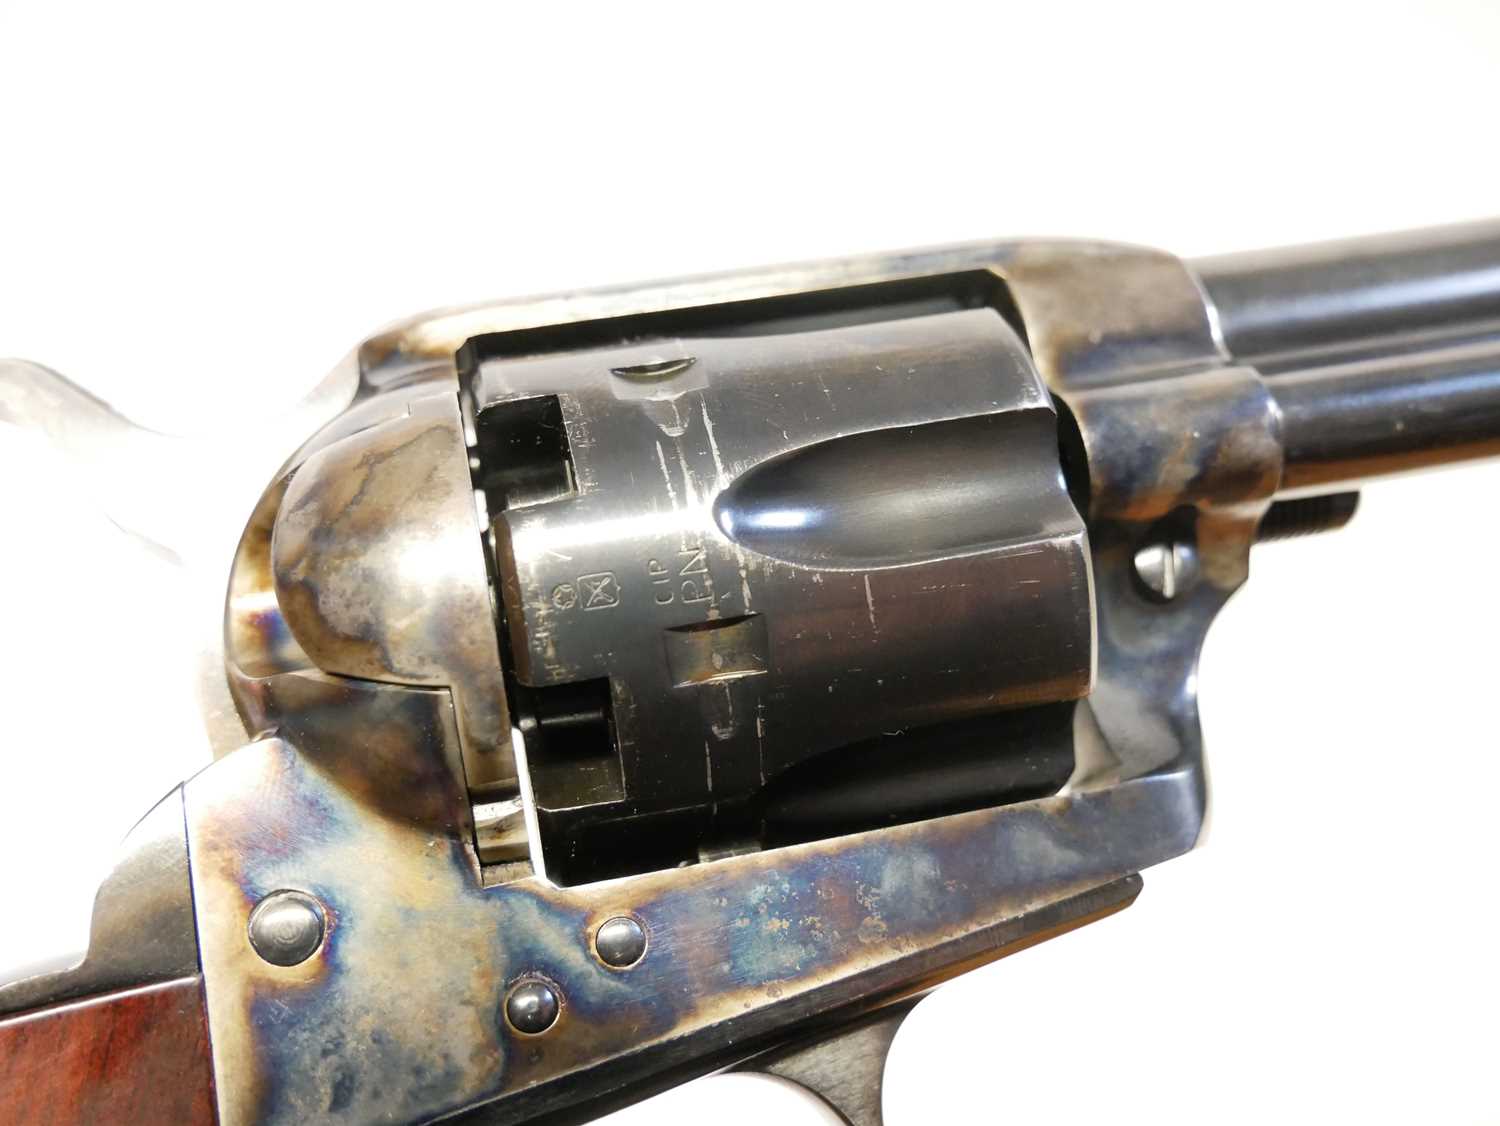 Uberti .44 percussion muzzle loading cattleman revolver, serial number UG0263, 7.5inch barrel, - Image 10 of 10